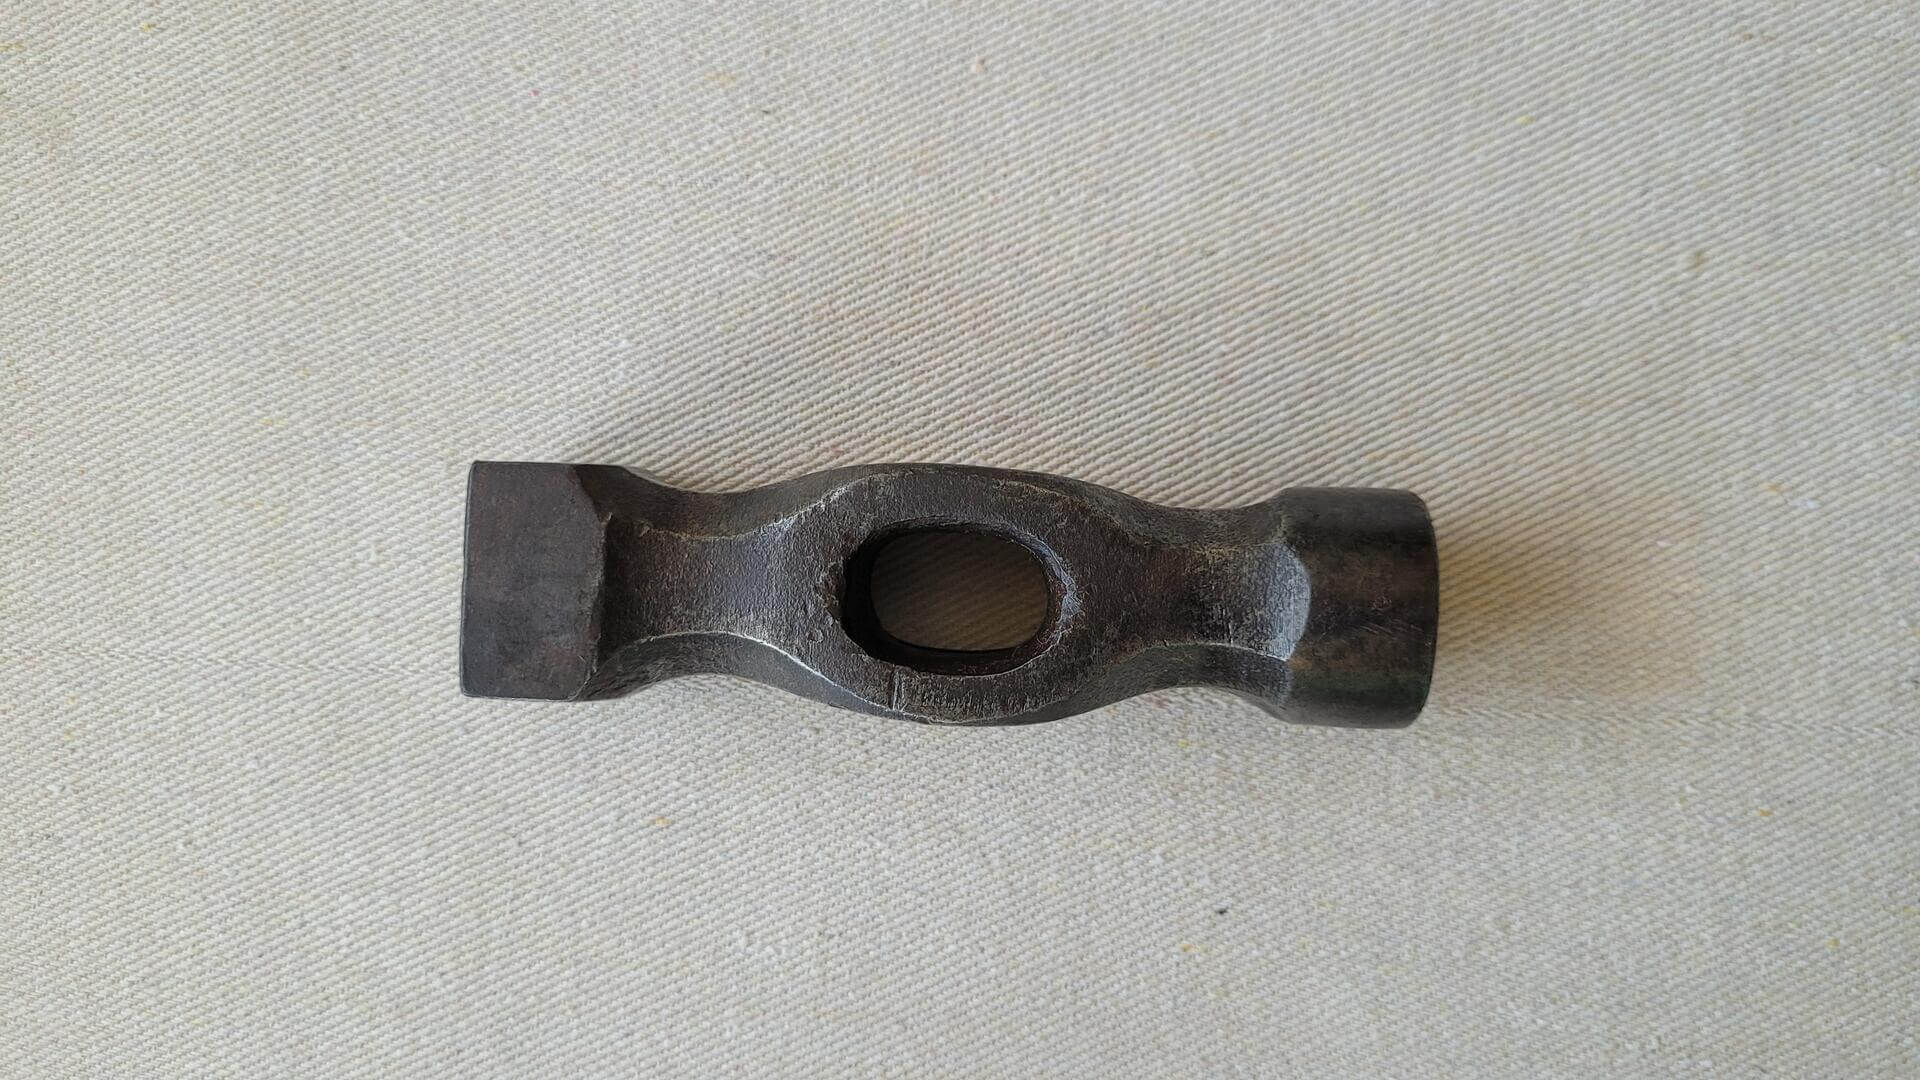 Vintage panel beating hammer head w square face 4 1/2" long. Antique collectible automotive & metalwork planishing mallet shaping forming striking tool